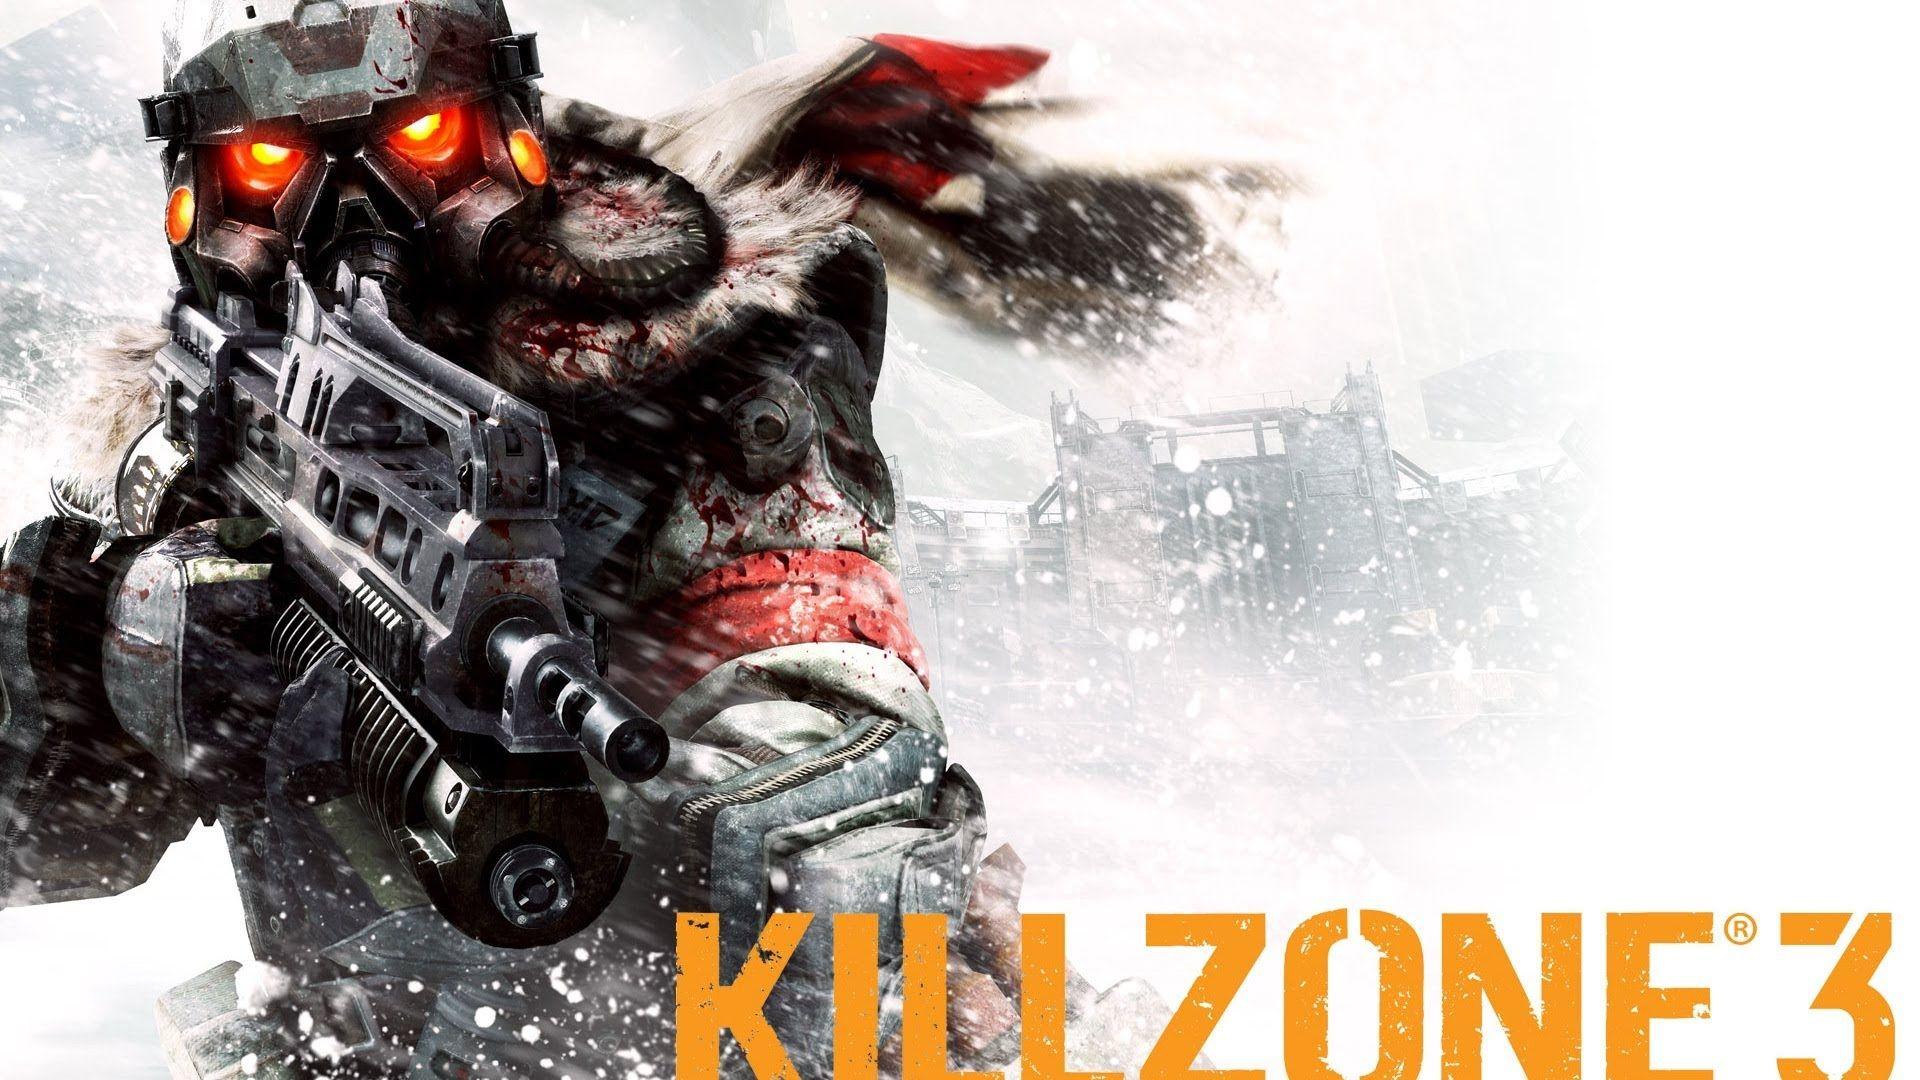 Killzone 3 Full HD Wallpaper and Background Imagex1080